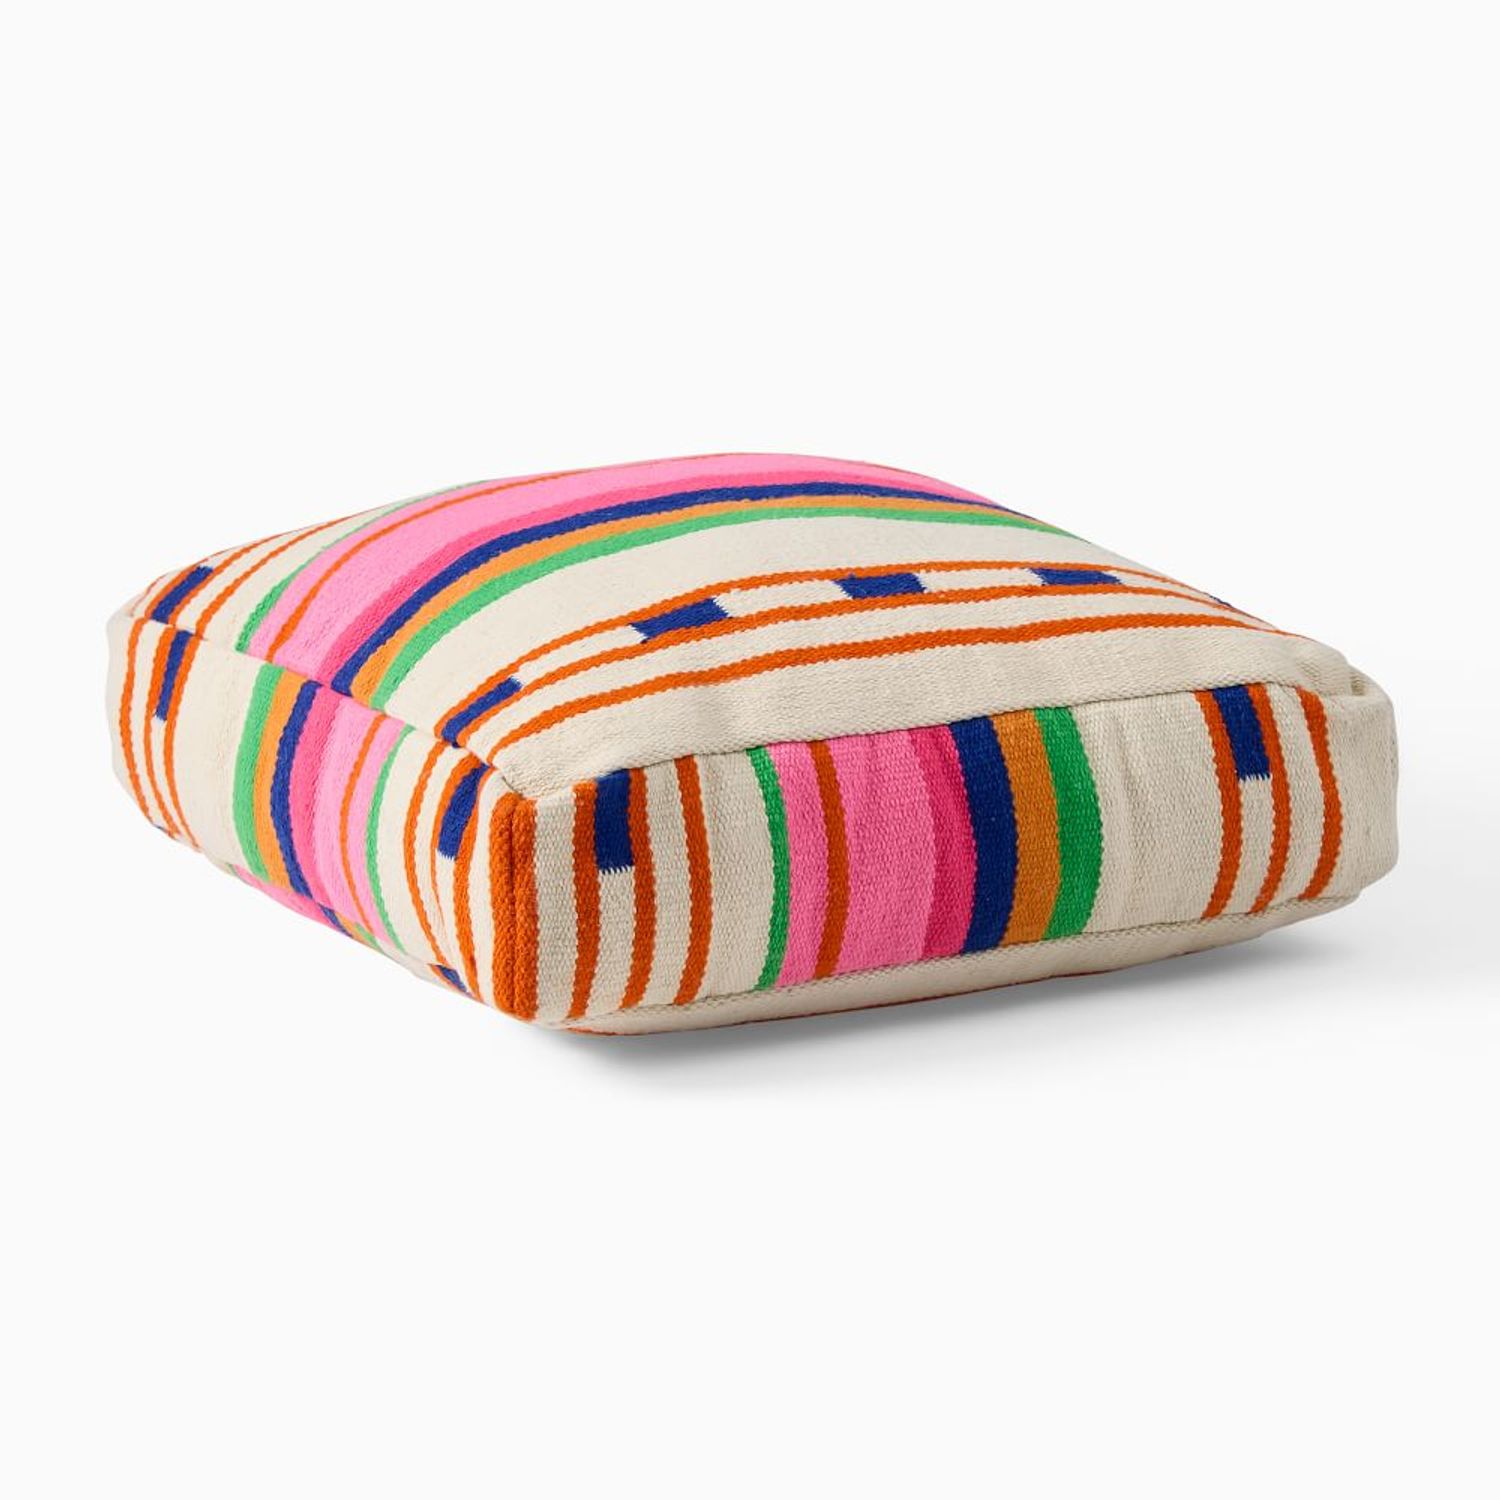 Shop Bole Road Outdoor Floor Cushion from West Elm on Openhaus